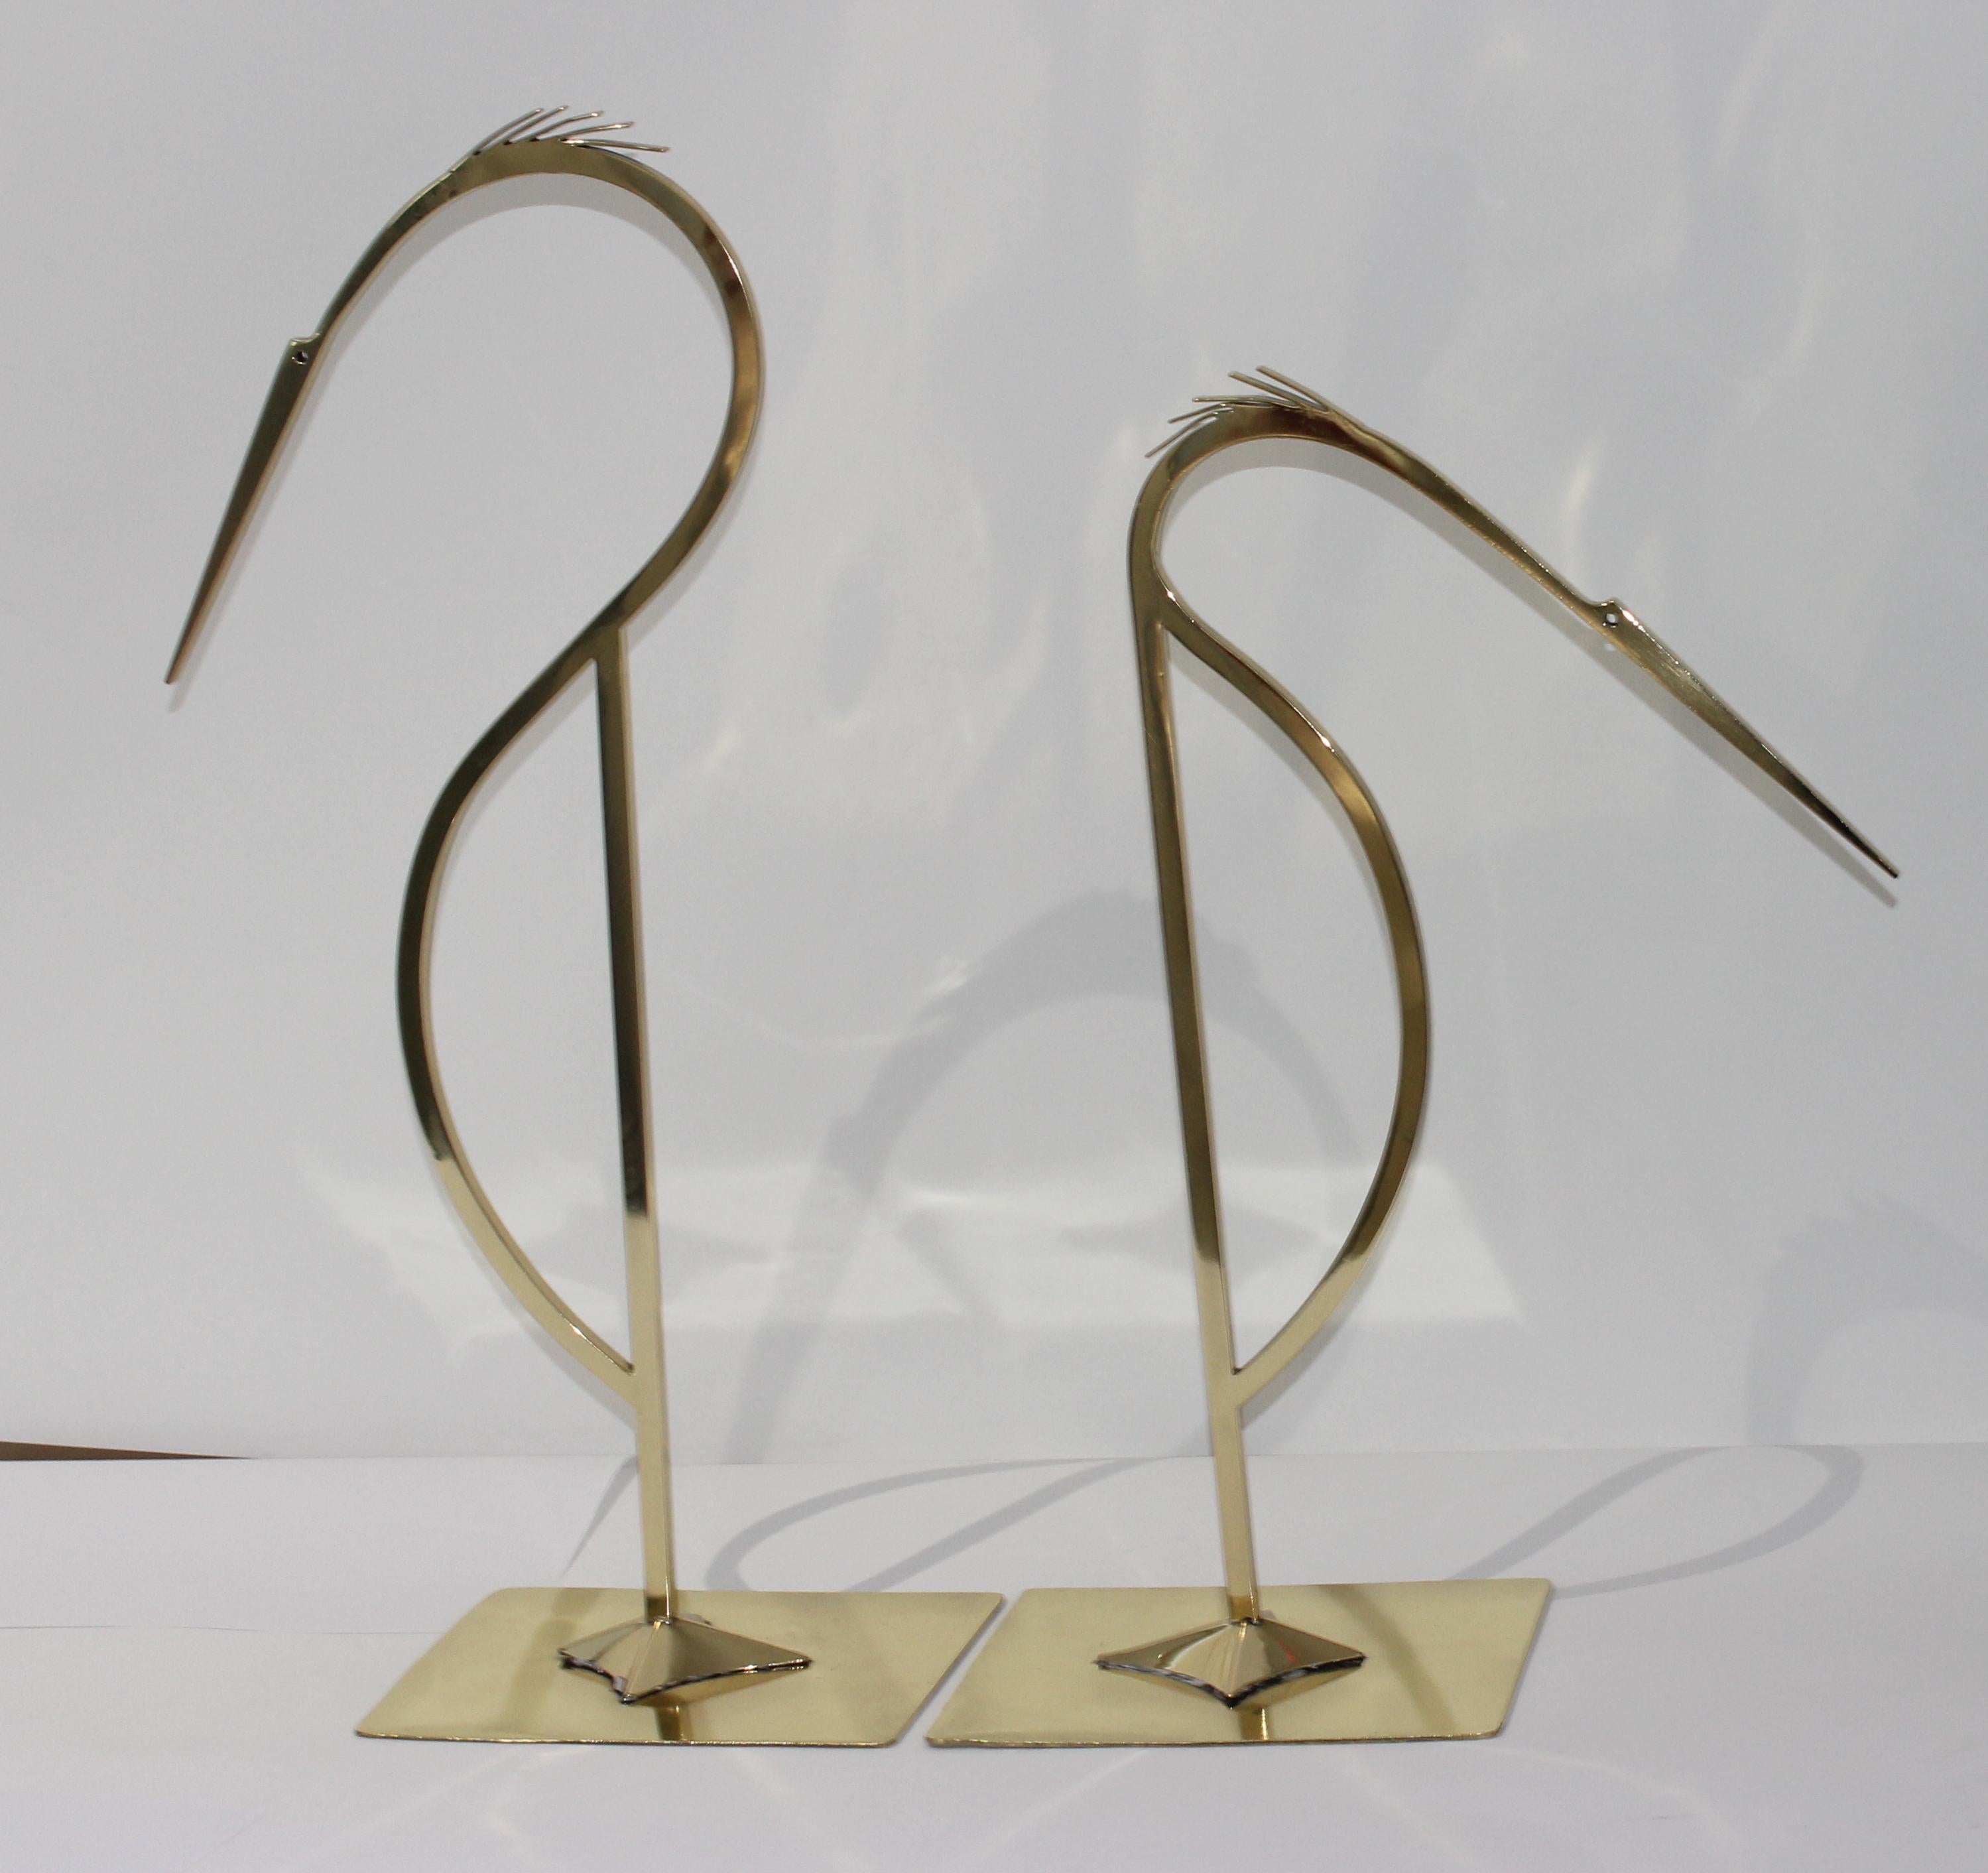 This stylish two piece set of stylized egrets date to the 1960s-1970s, and they will definetly make a subtle statement with their form and finish.

Note: Dimensions of the taller egret are 22.50